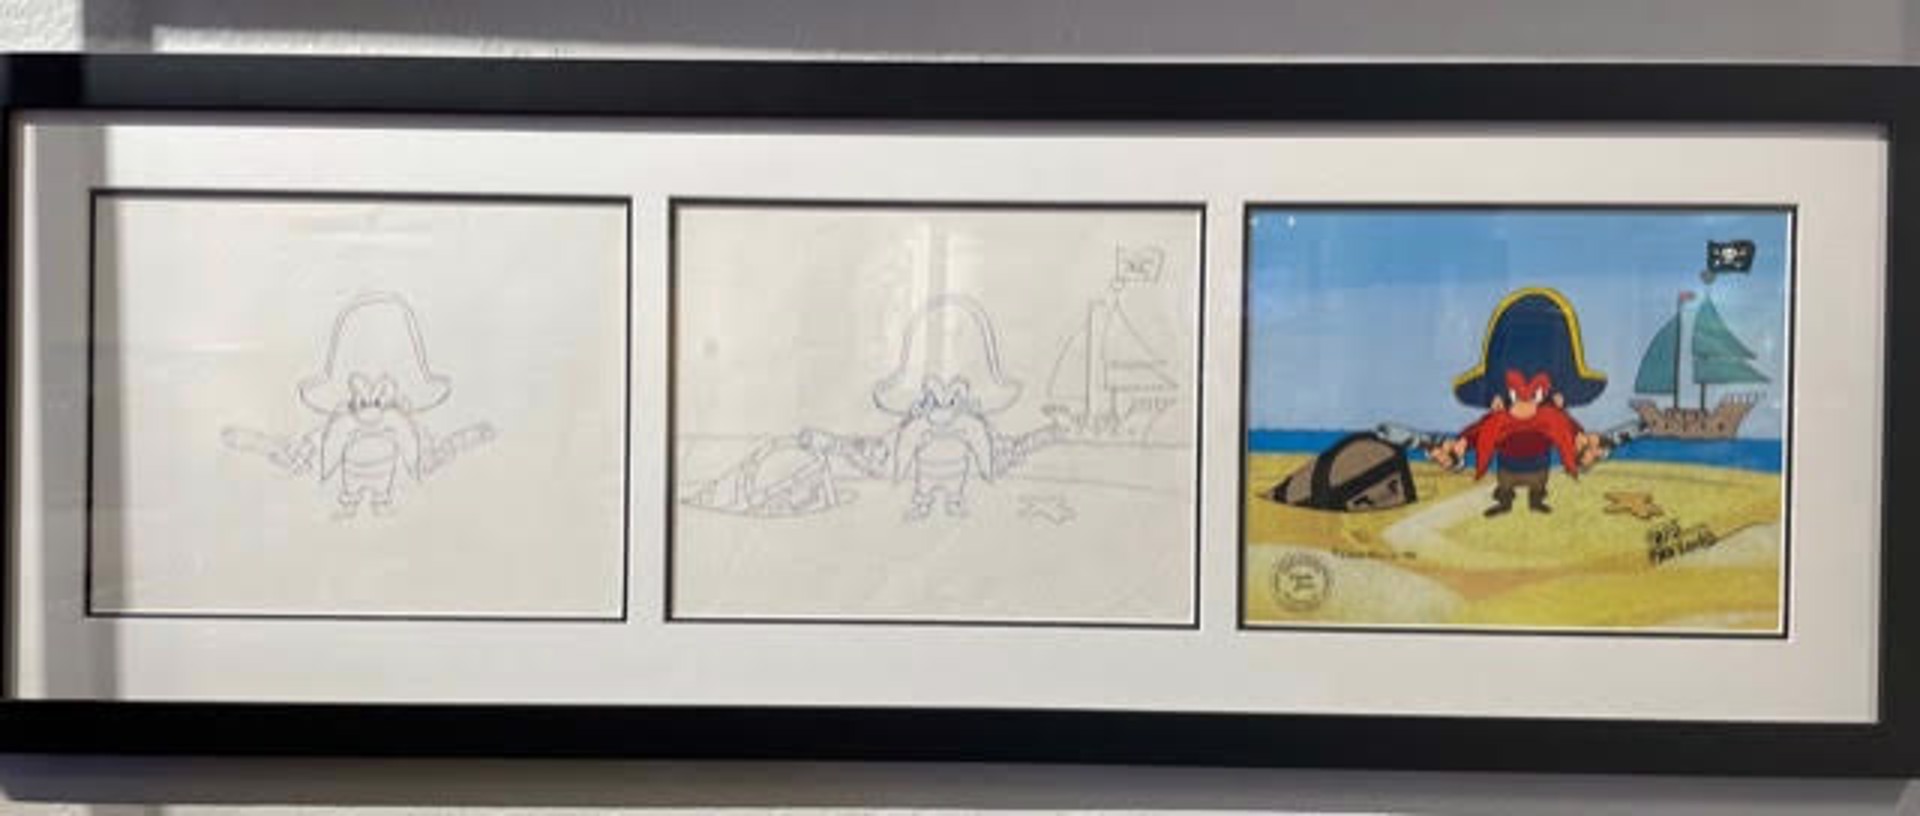 Yosemite Pirate w/2 Concept Drawings, FF Concept 1 and 2, (73832) by Chuck Jones